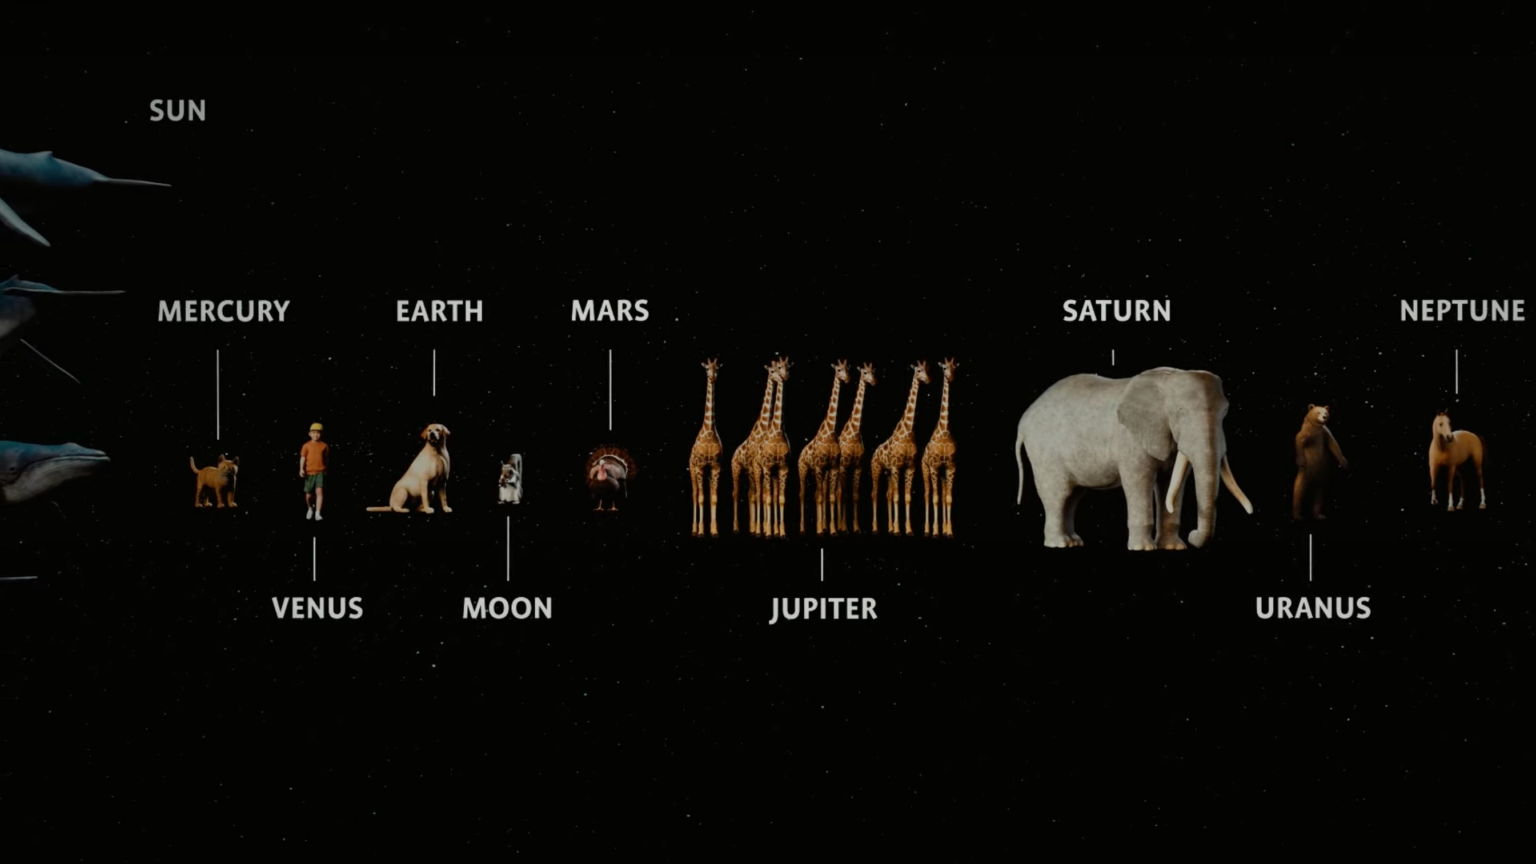 planet names alongside images of a cat, human, dog, rat, squirrel, giraffes, elephant, bear, and horse